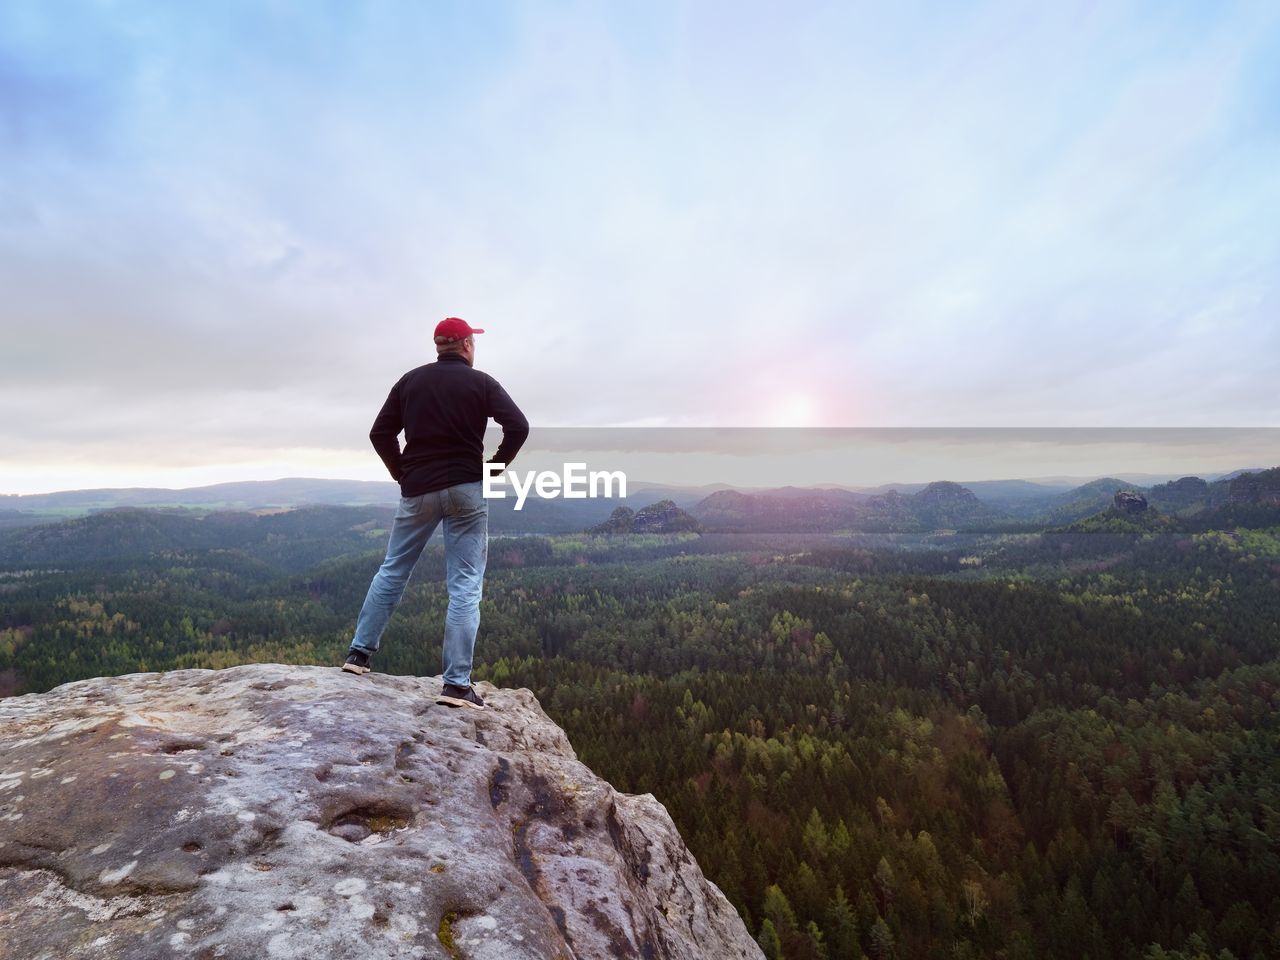 Man in jeans black outdoor sweatshirt and red cap. melancholy misty day in sandstone mountains